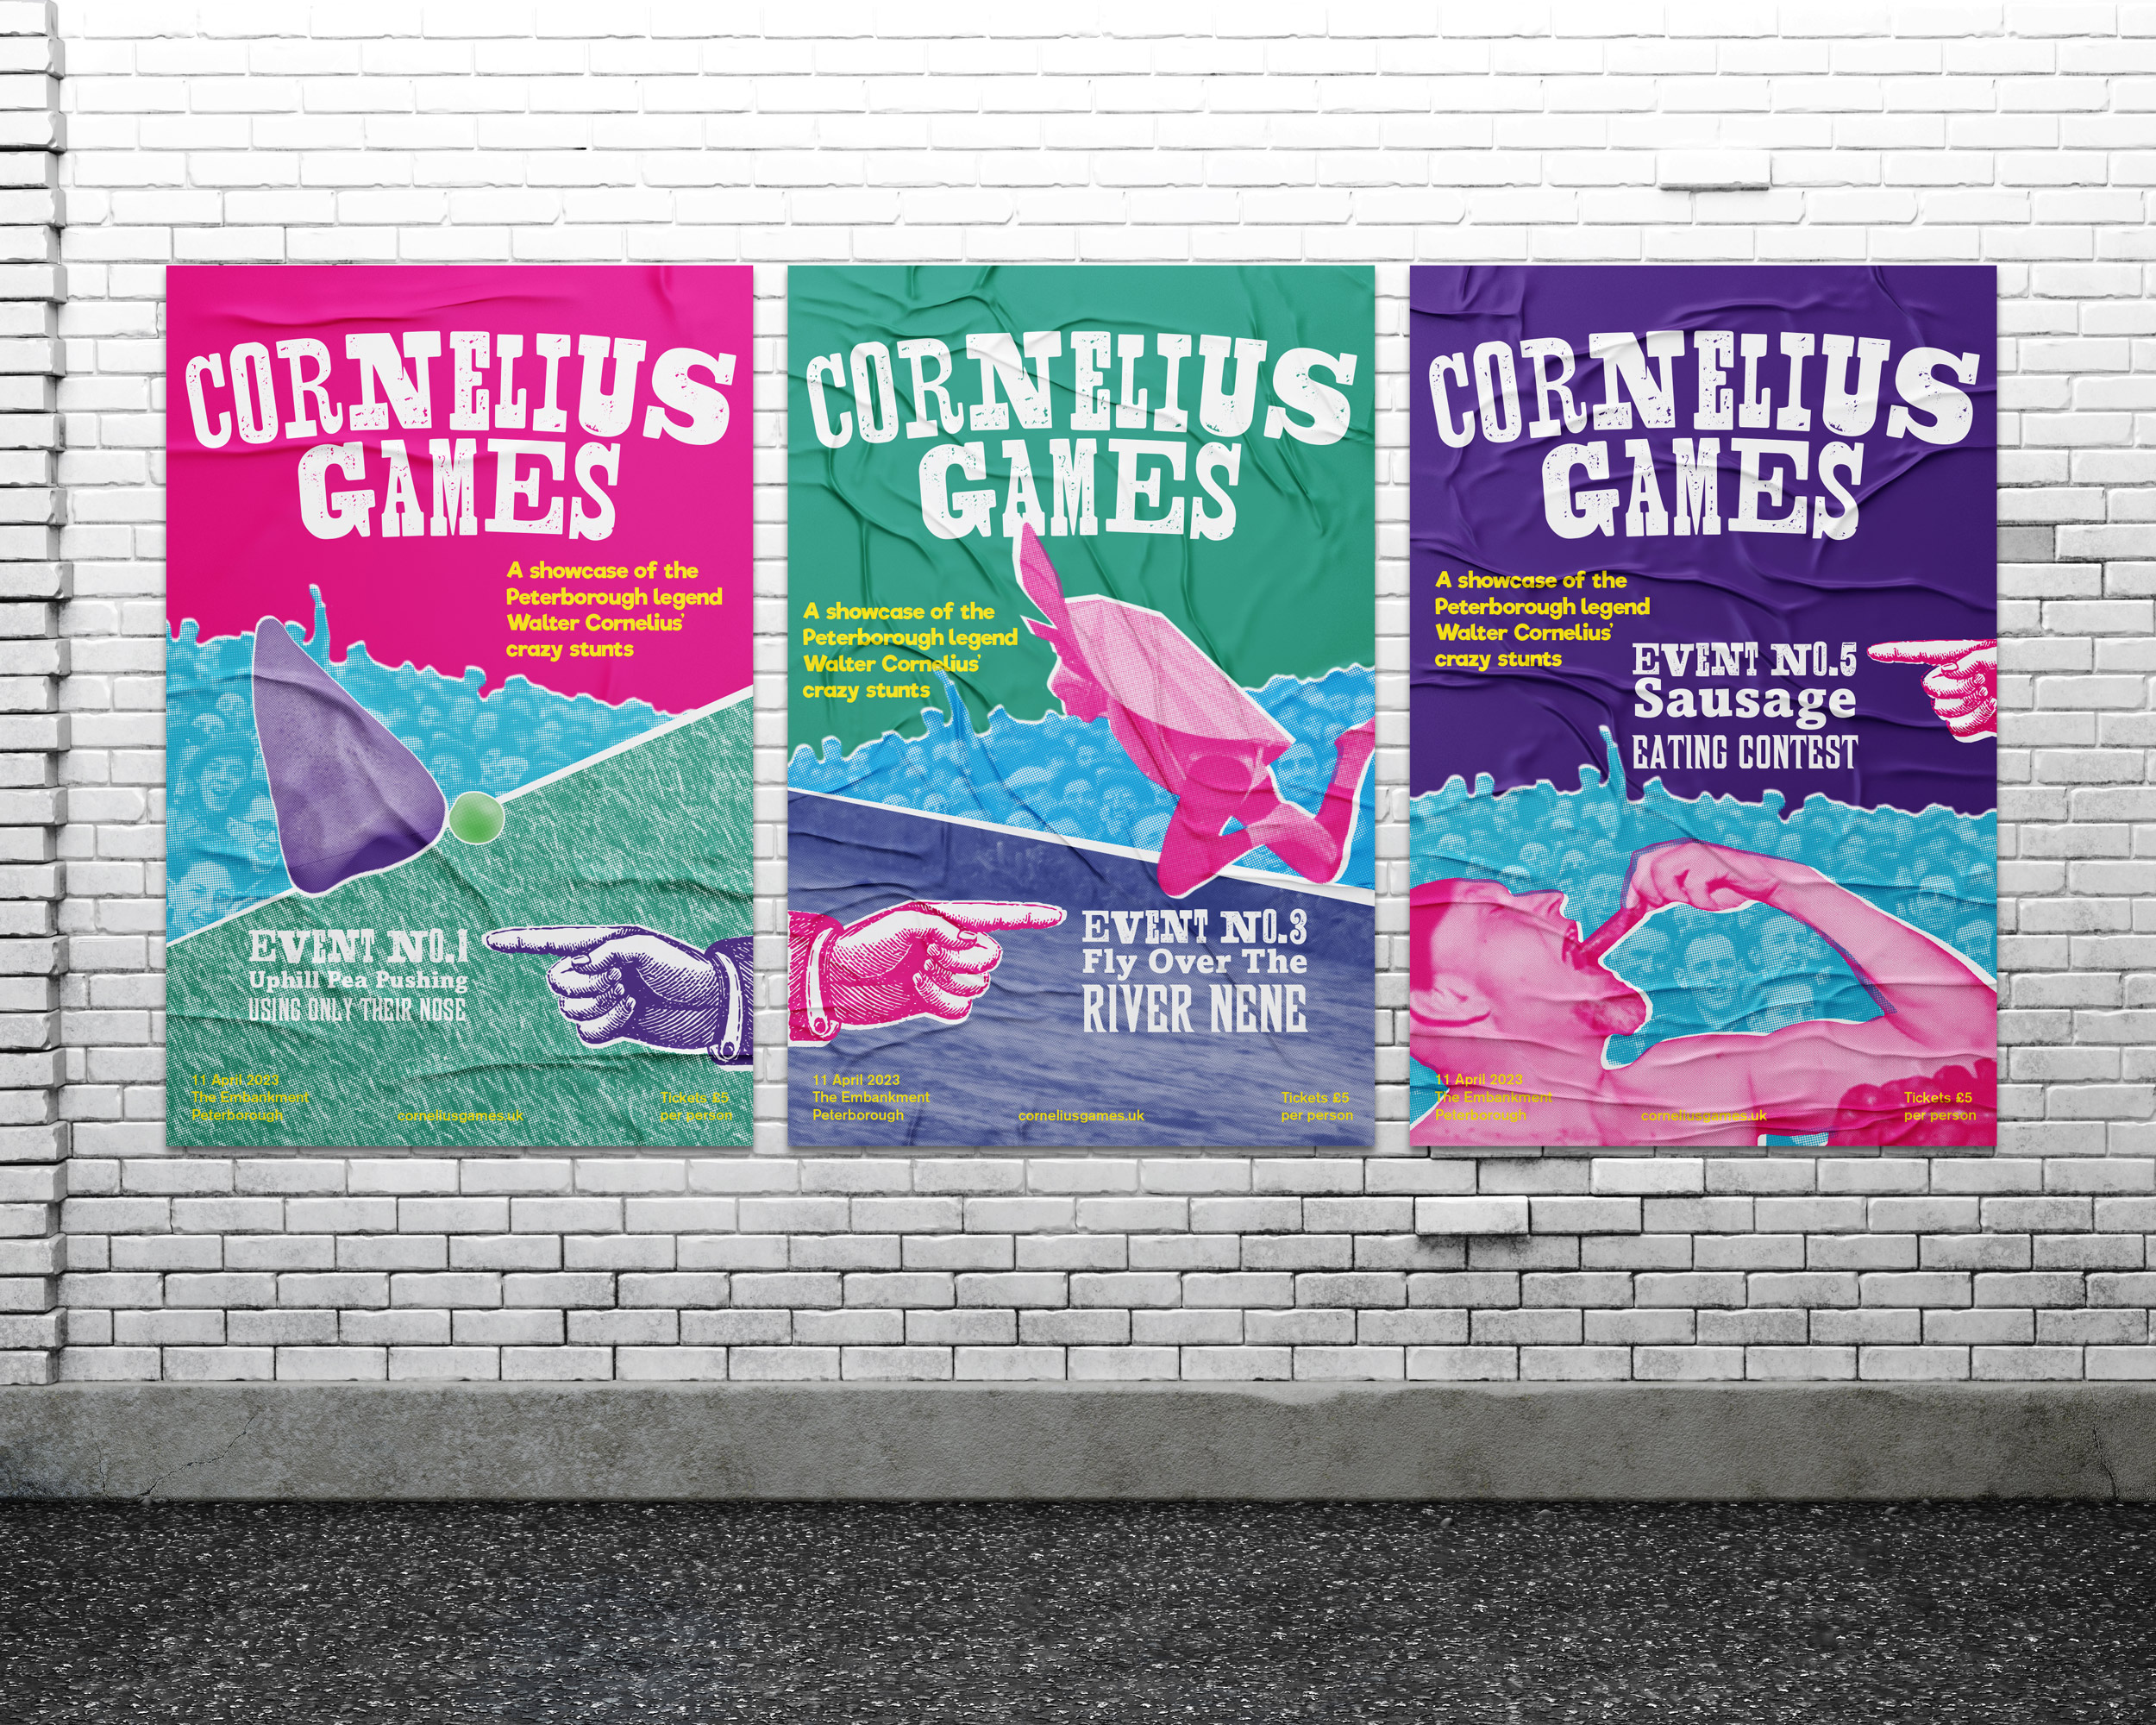 Cornelius Games posters whith white text and colourful collages.